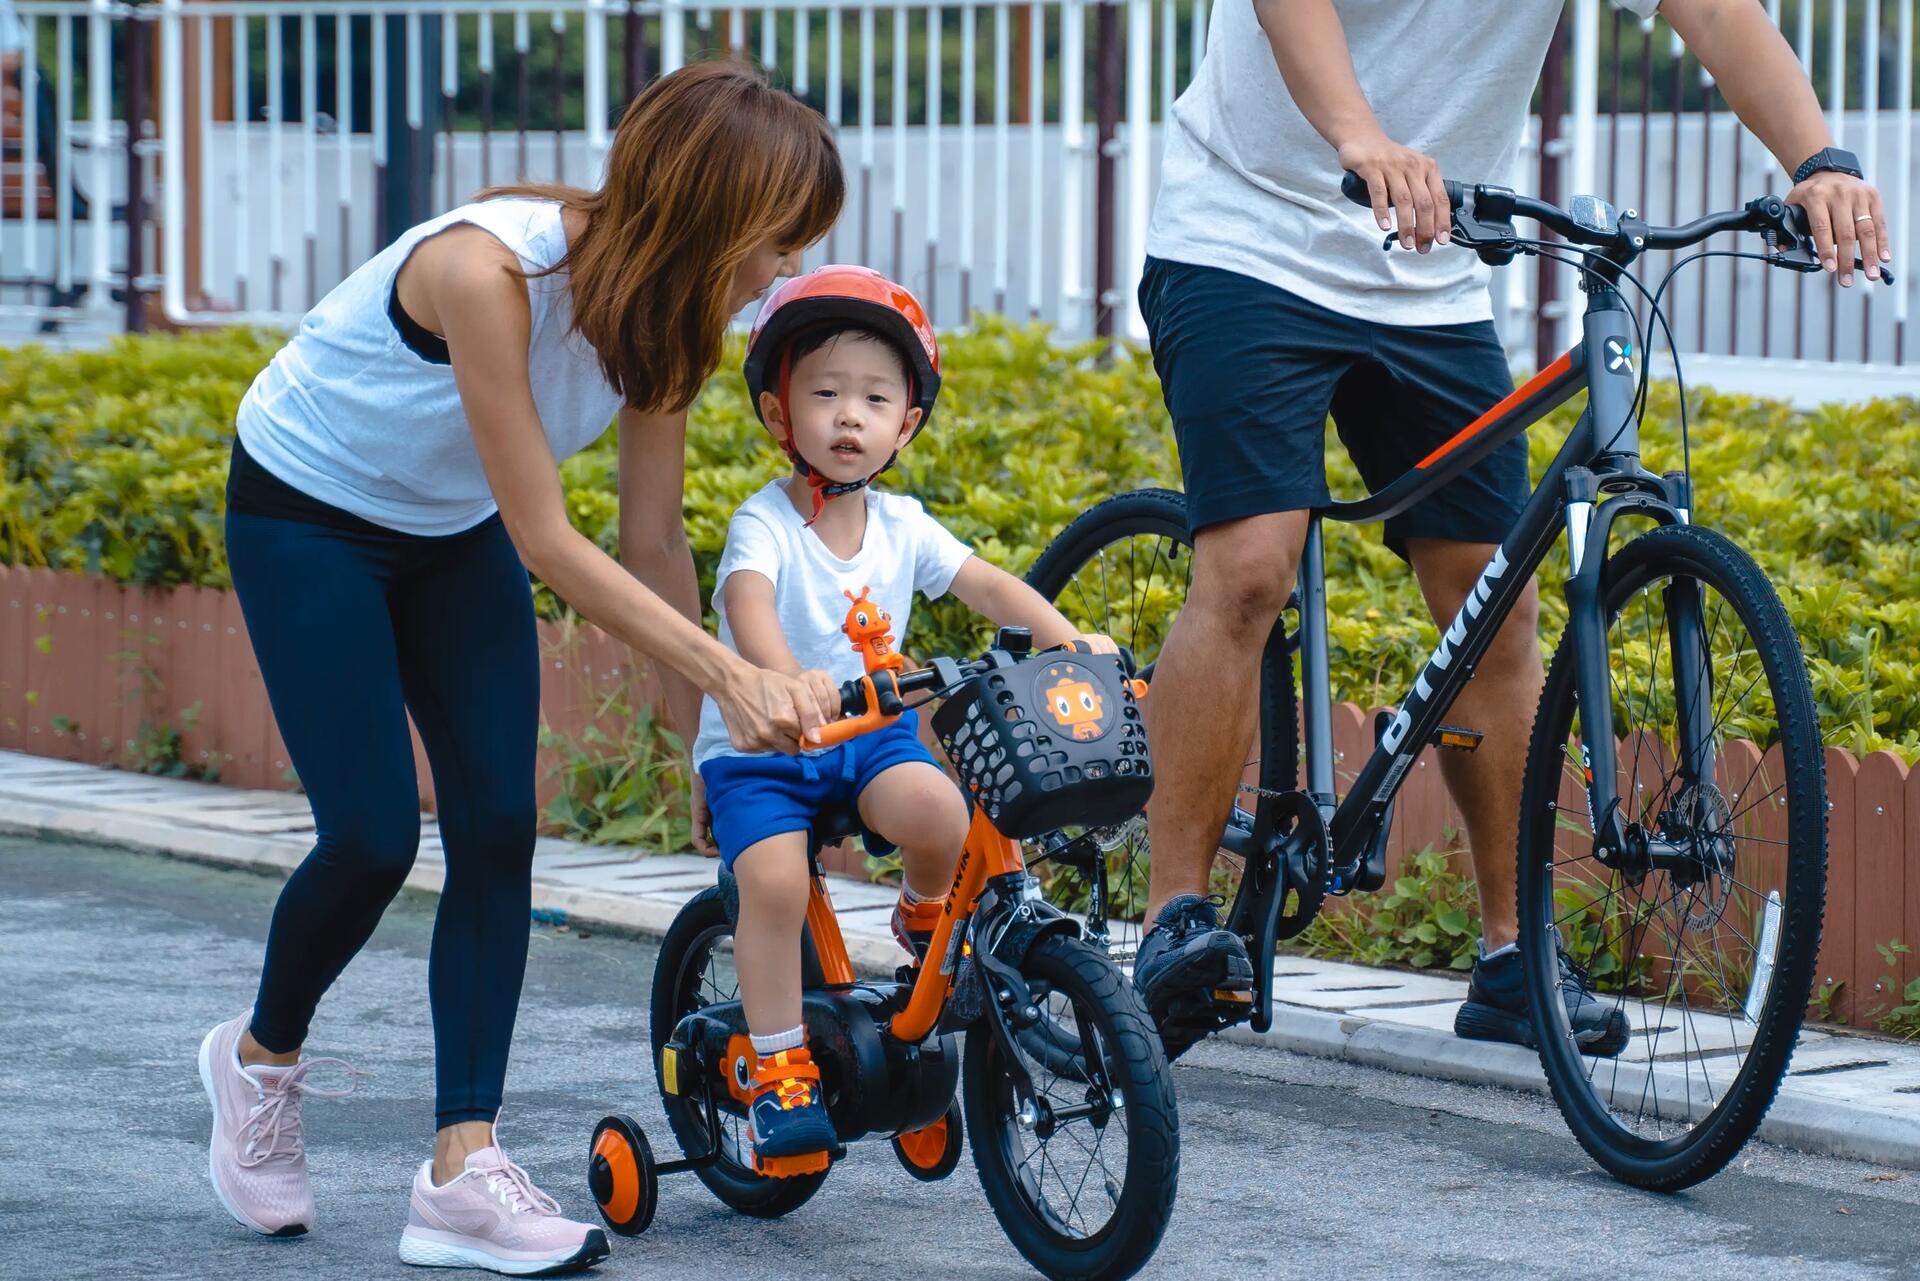 How to Teach Your Child to Ride A Bike?